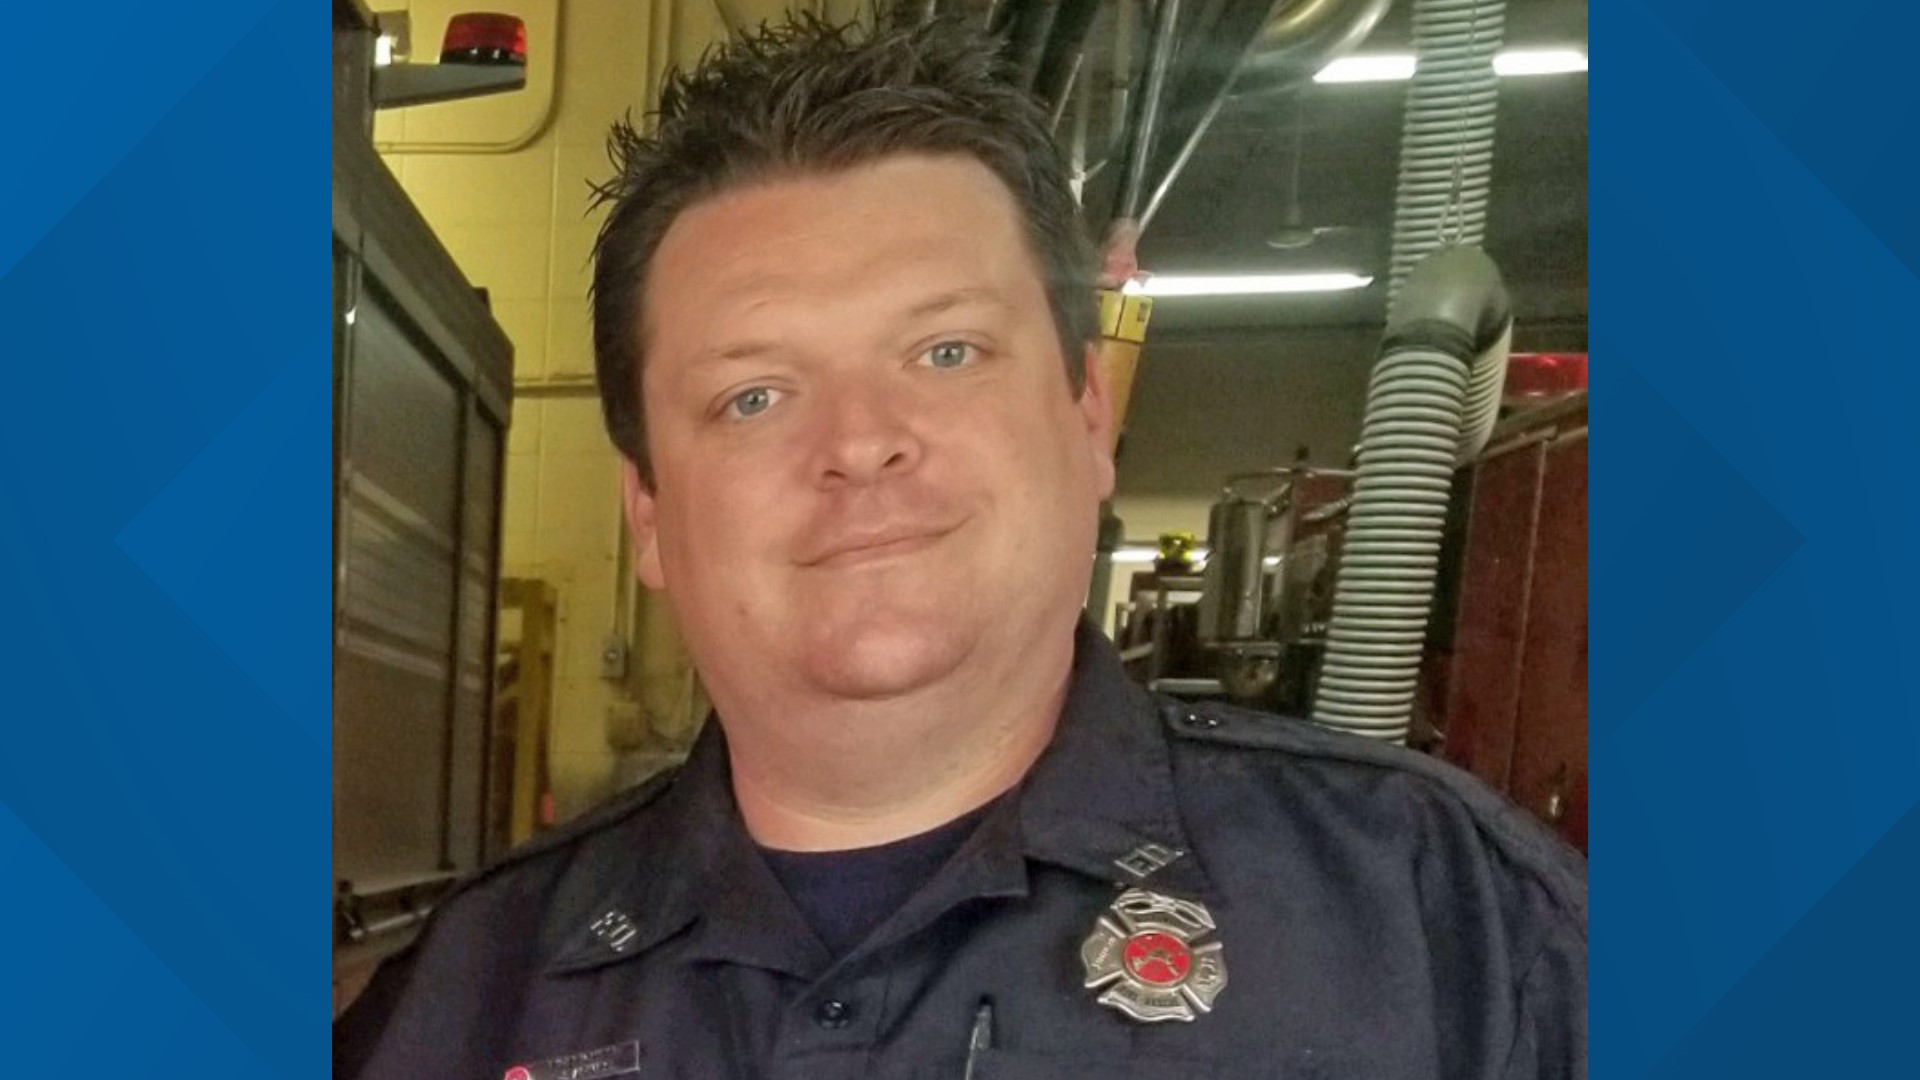 The Nelsonville Division of Fire said senior firefighter Jeff Armes was one of the firefighters who responded to the building fire on Pleasantview Avenue on Sunday.